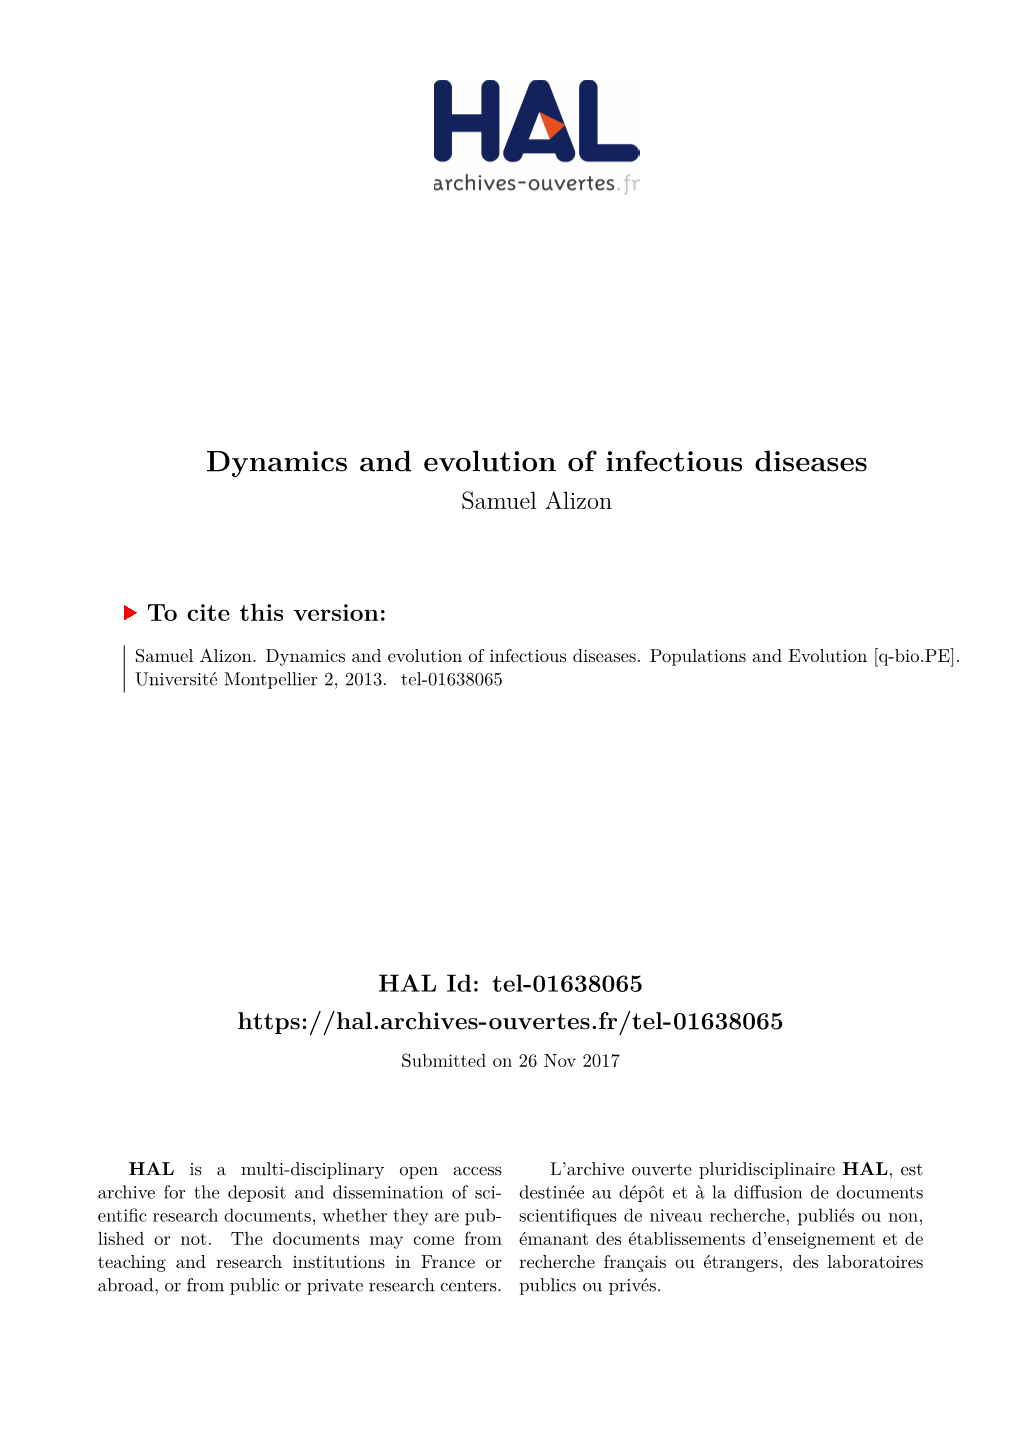 Dynamics and Evolution of Infectious Diseases Samuel Alizon